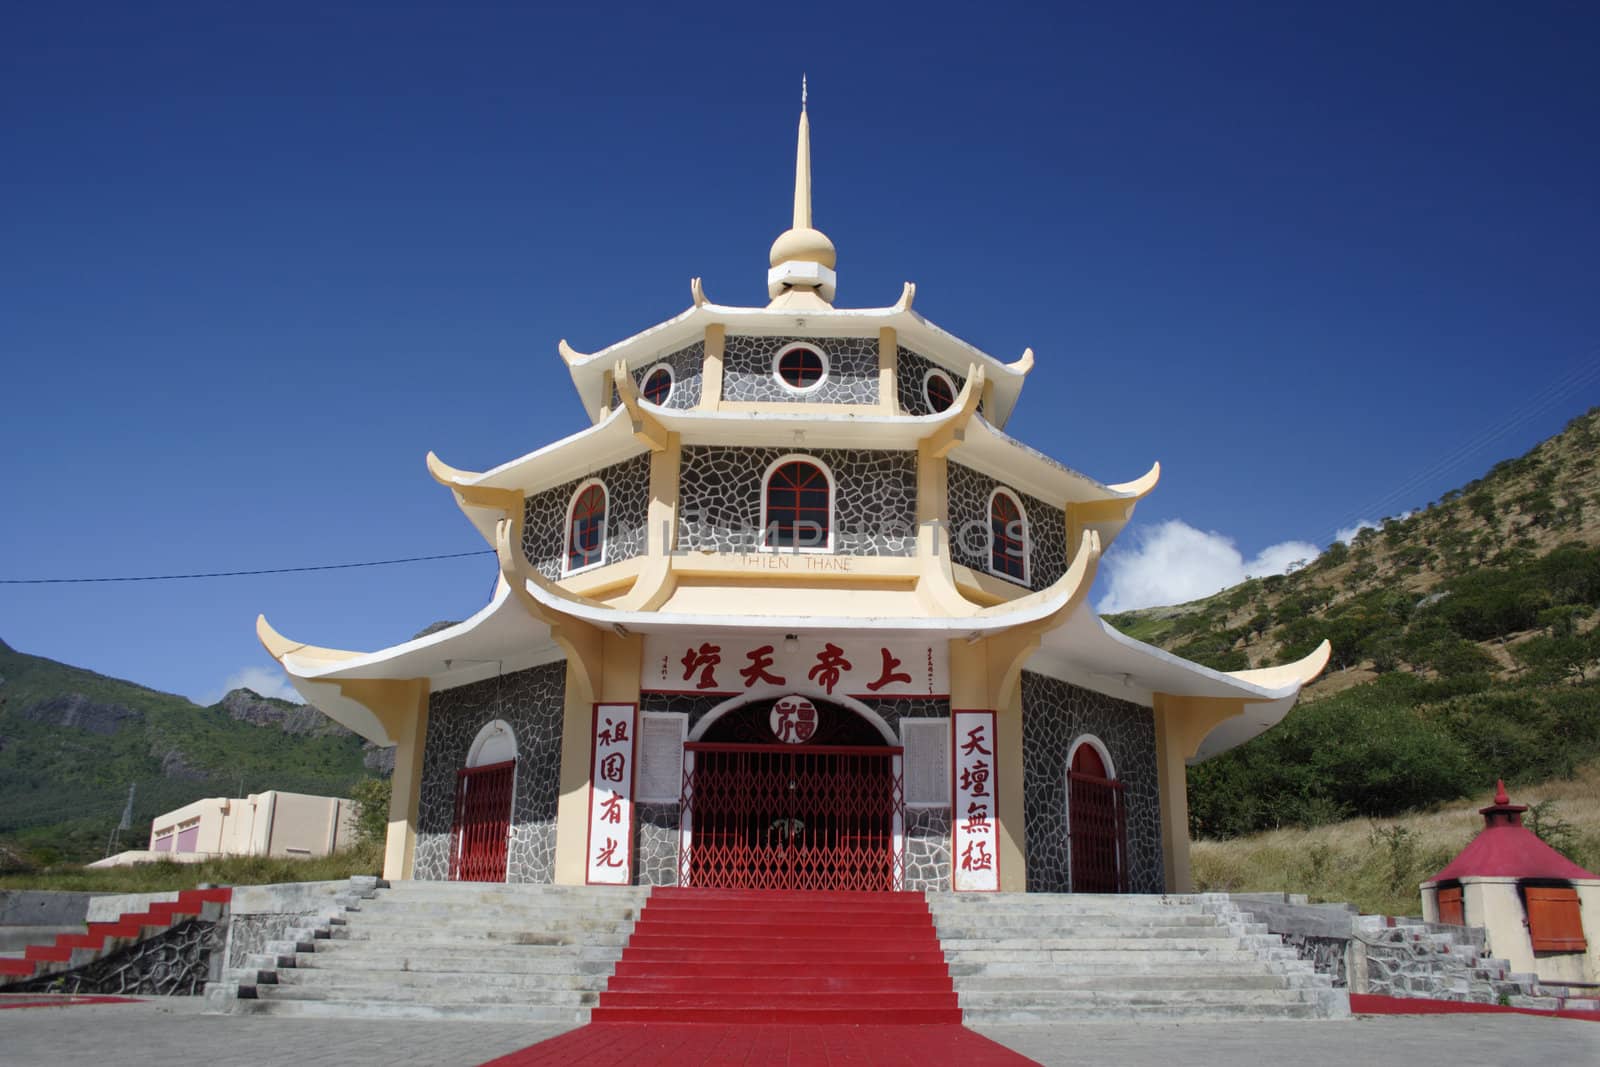 Image of Thien Thane pagoda, a chinese religious monument in Port Louis, Mauritius